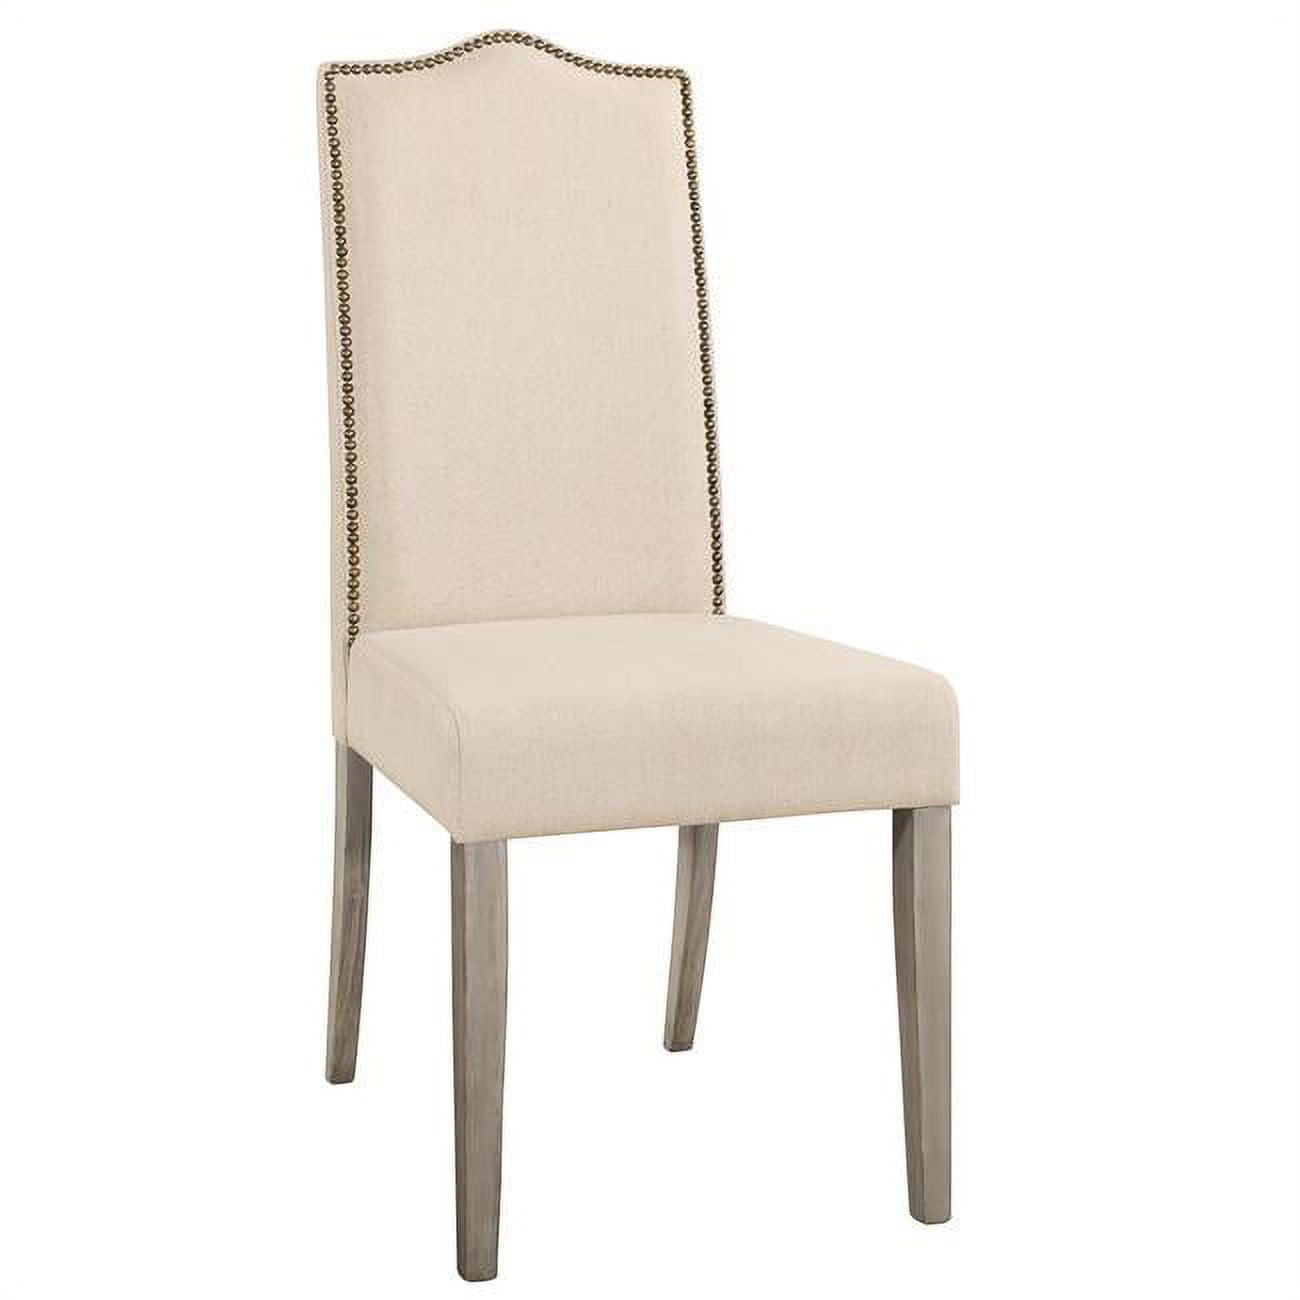 1817-wgln Romero Parson Chair - Weathered Gray With Linen - 22.5 X 41.5 X 18.5 In.